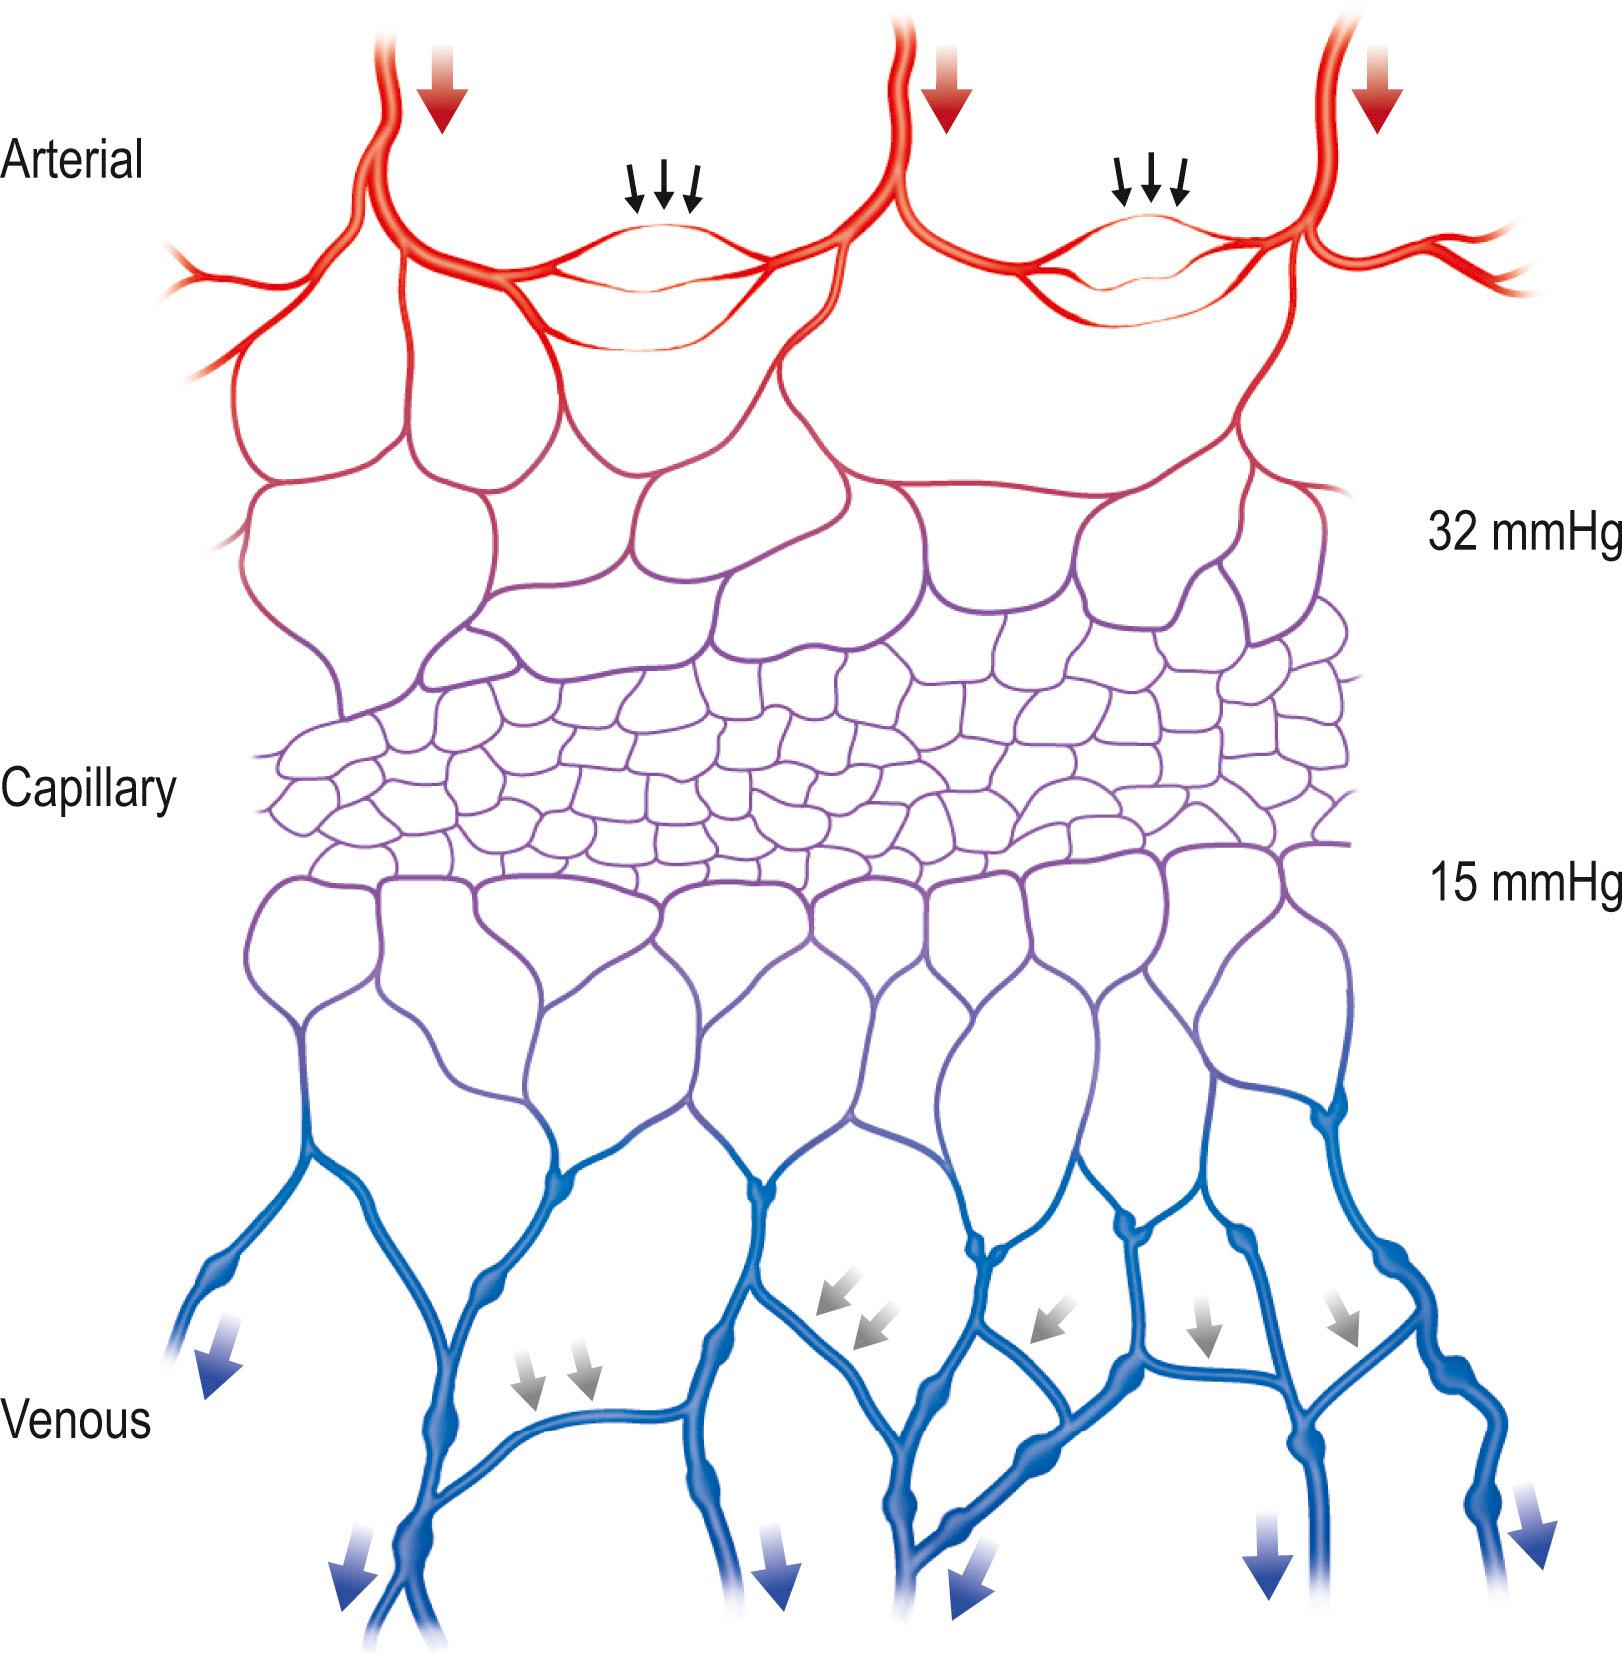 Figure 23.1, Schematic representation of the arterial supply and venous drainage of the capillary bed. Note the choke arteries (small black arrows) and bidirectional avalvular veins (small shaded arrows) that allow equilibration of flow and pressure to the capillary bed from arterioles (red arrows) and from the capillary bed through venules (blue arrows).